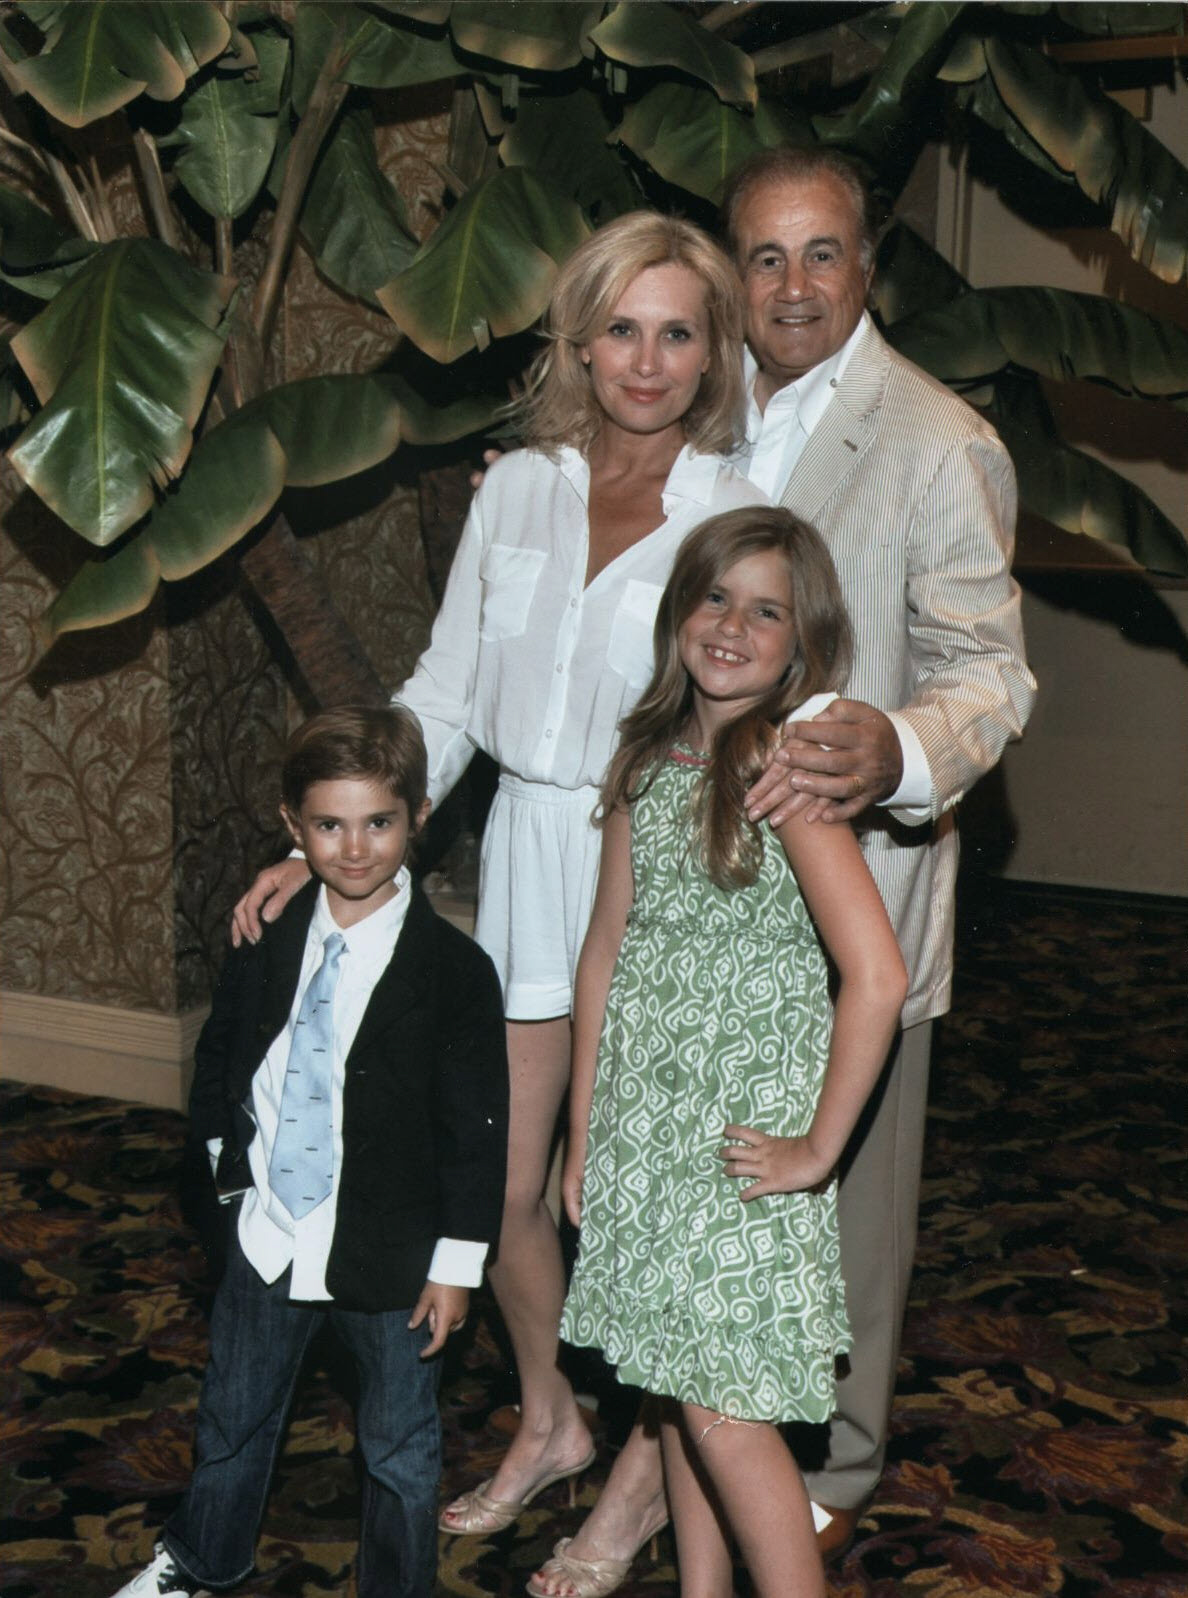 Larry A. Thompson with wife, Kelly, and children, Taylor and Trevor, in Las Vegas 2009